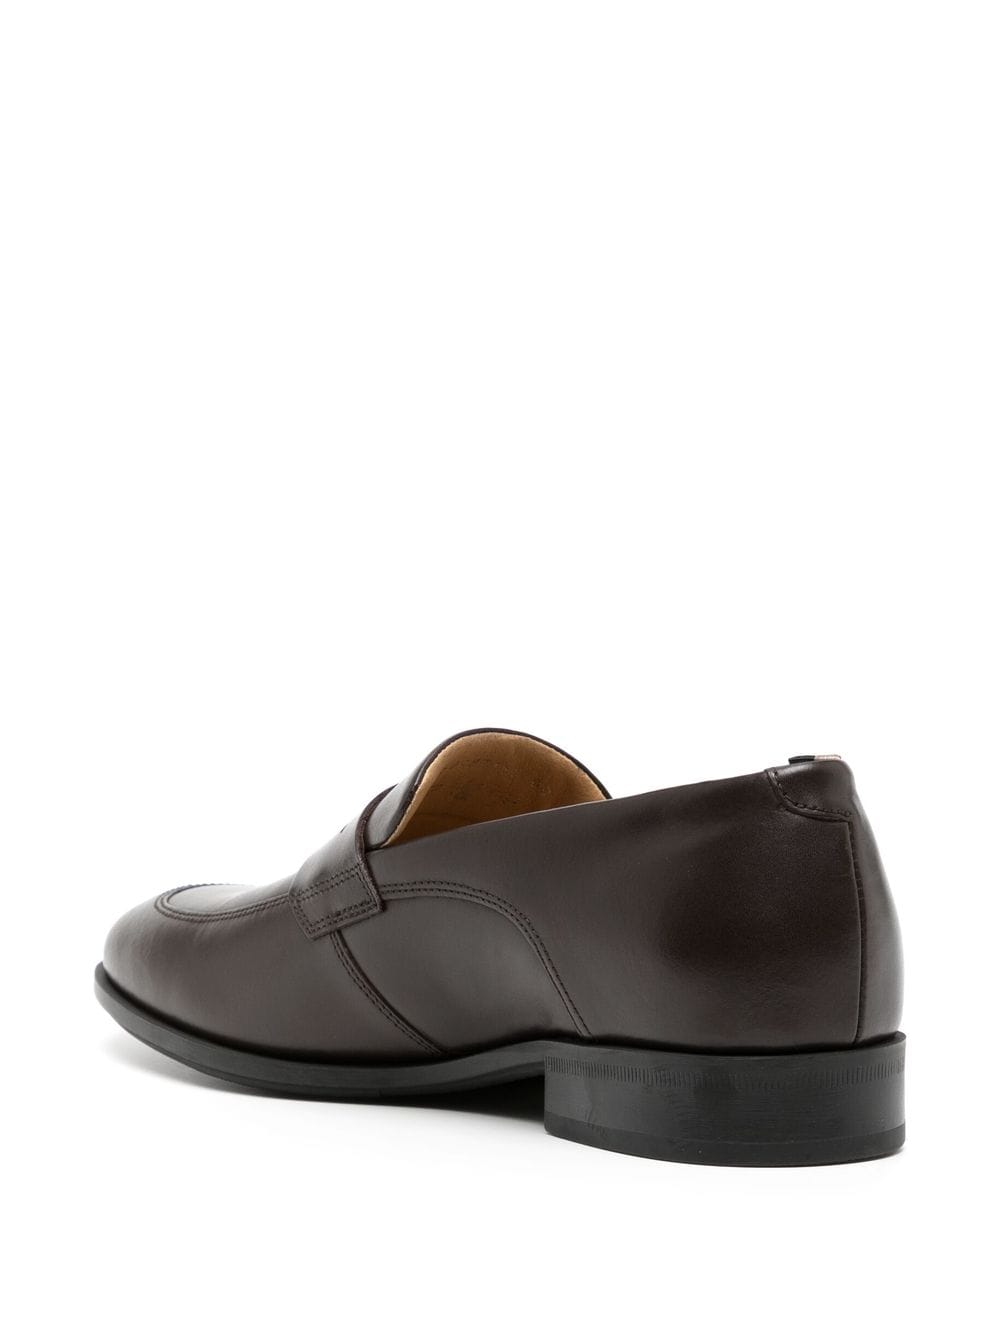 Hugo Boss Colby Leather Penny Loafers In Braun | ModeSens